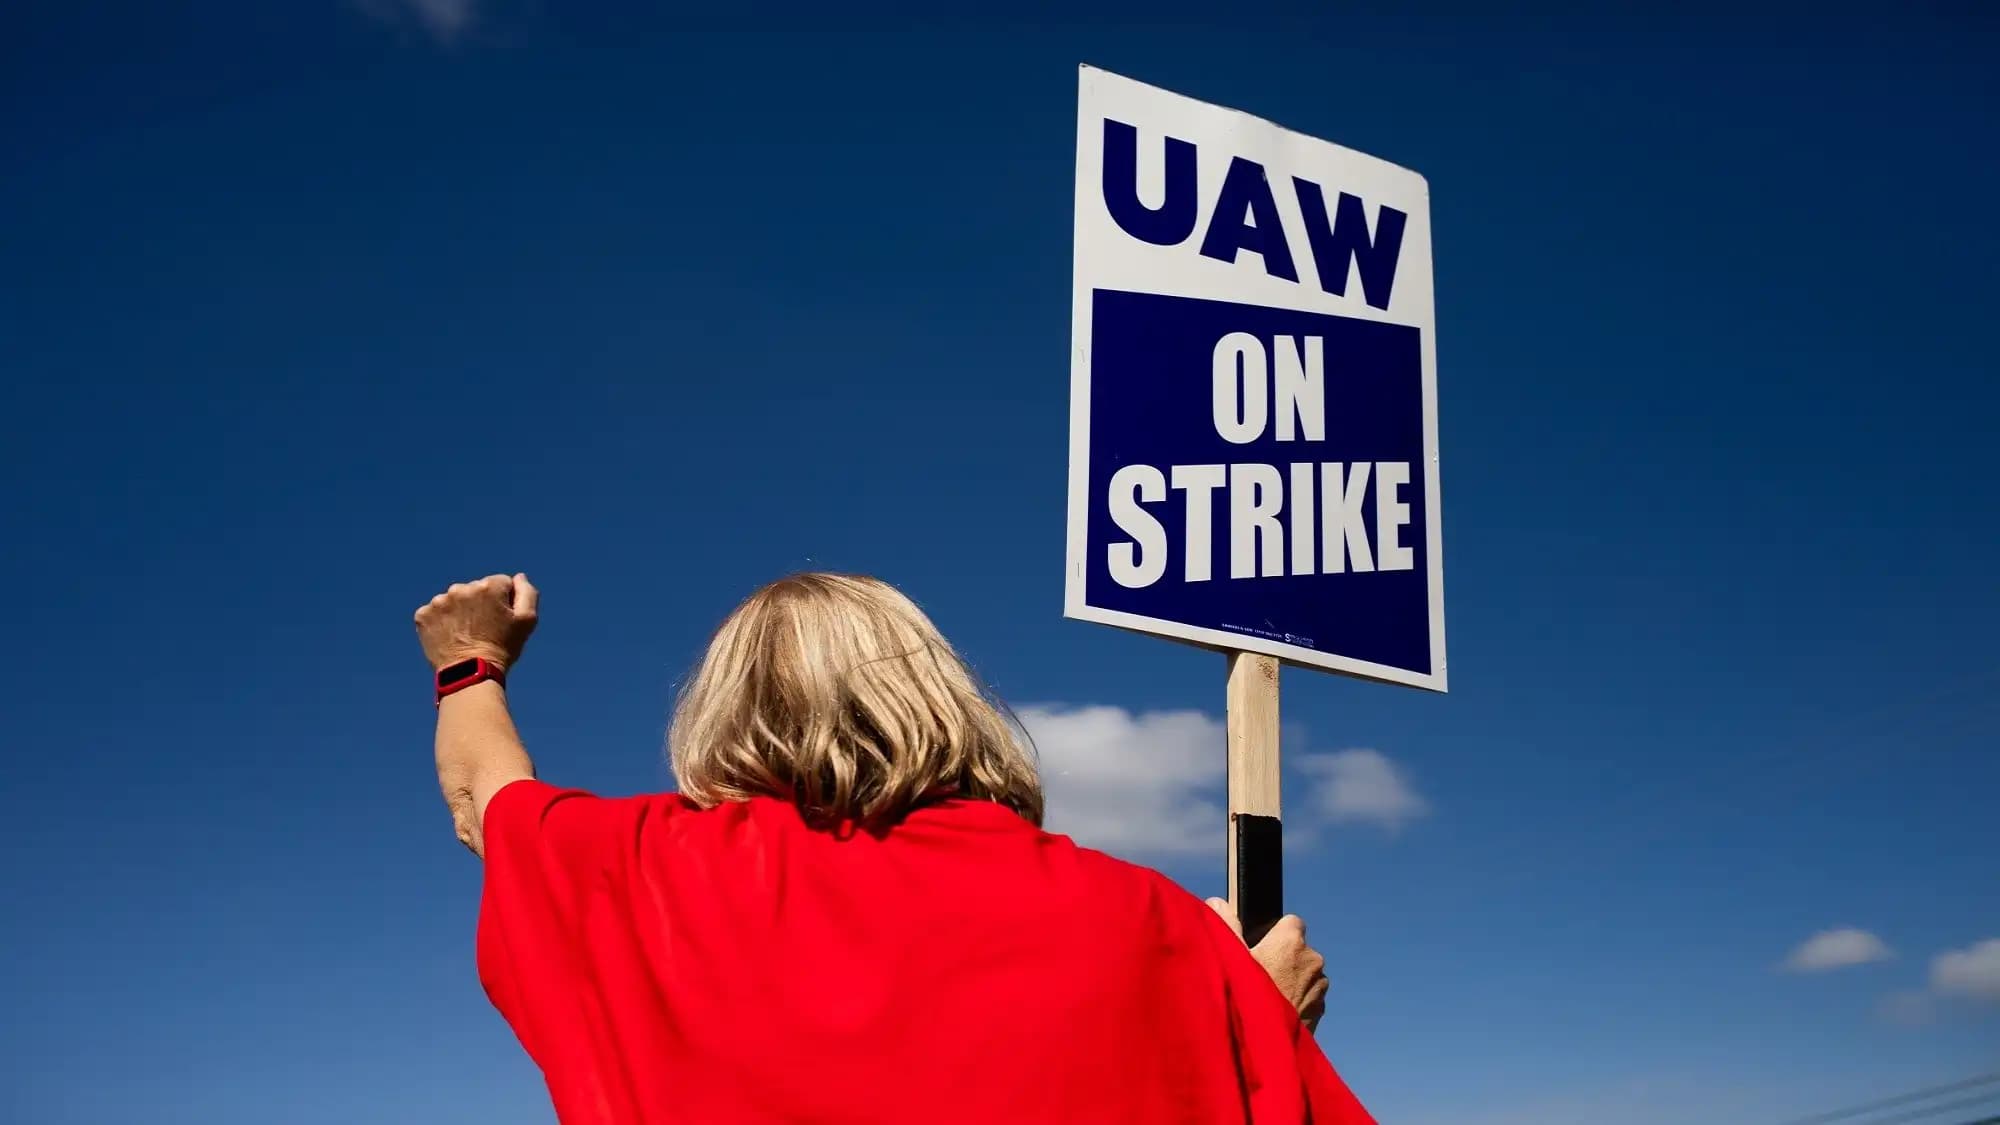 Consequences of the UAW strike on the American economy